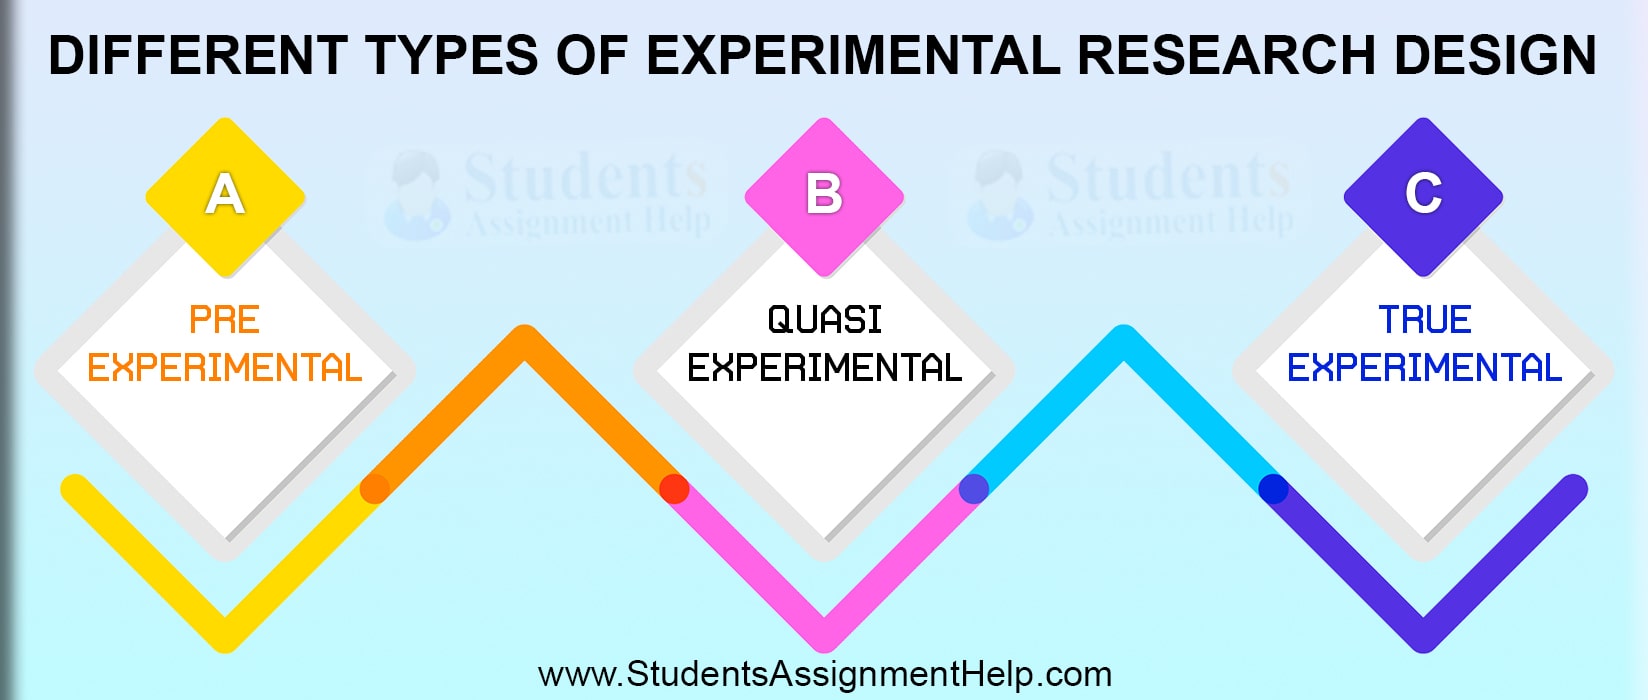 experimental research design example in education